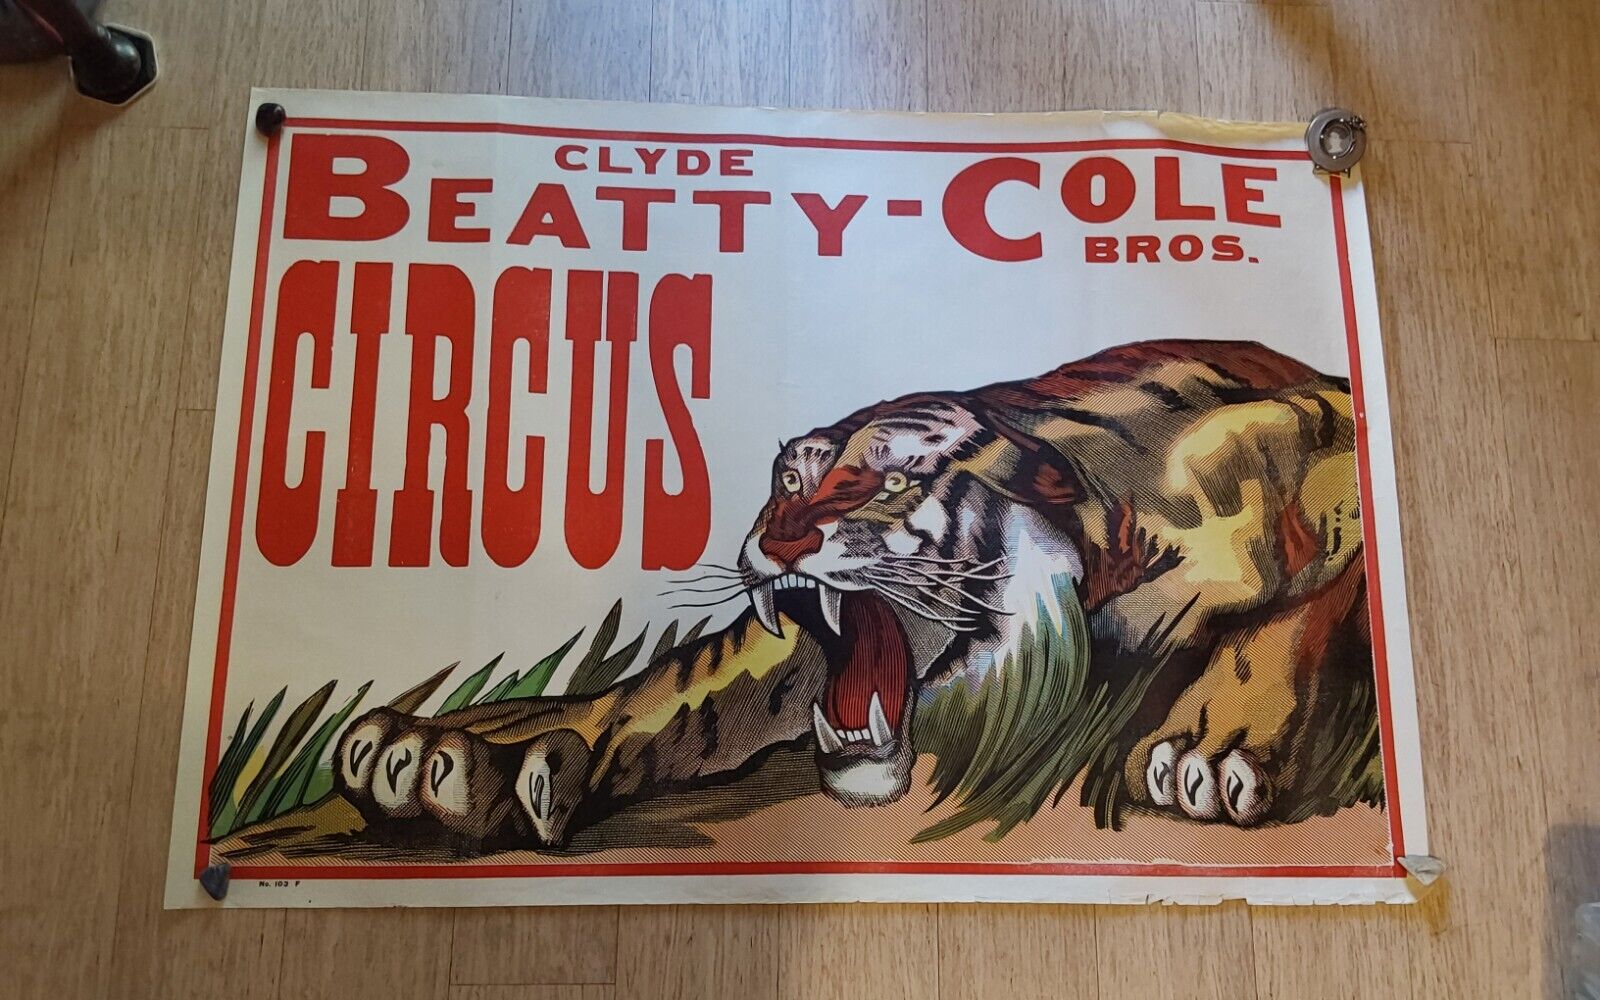 2 Vintage Original CLYDE BEATTY COLE CIRCUS POSTERS with Lion & Tiger Animals